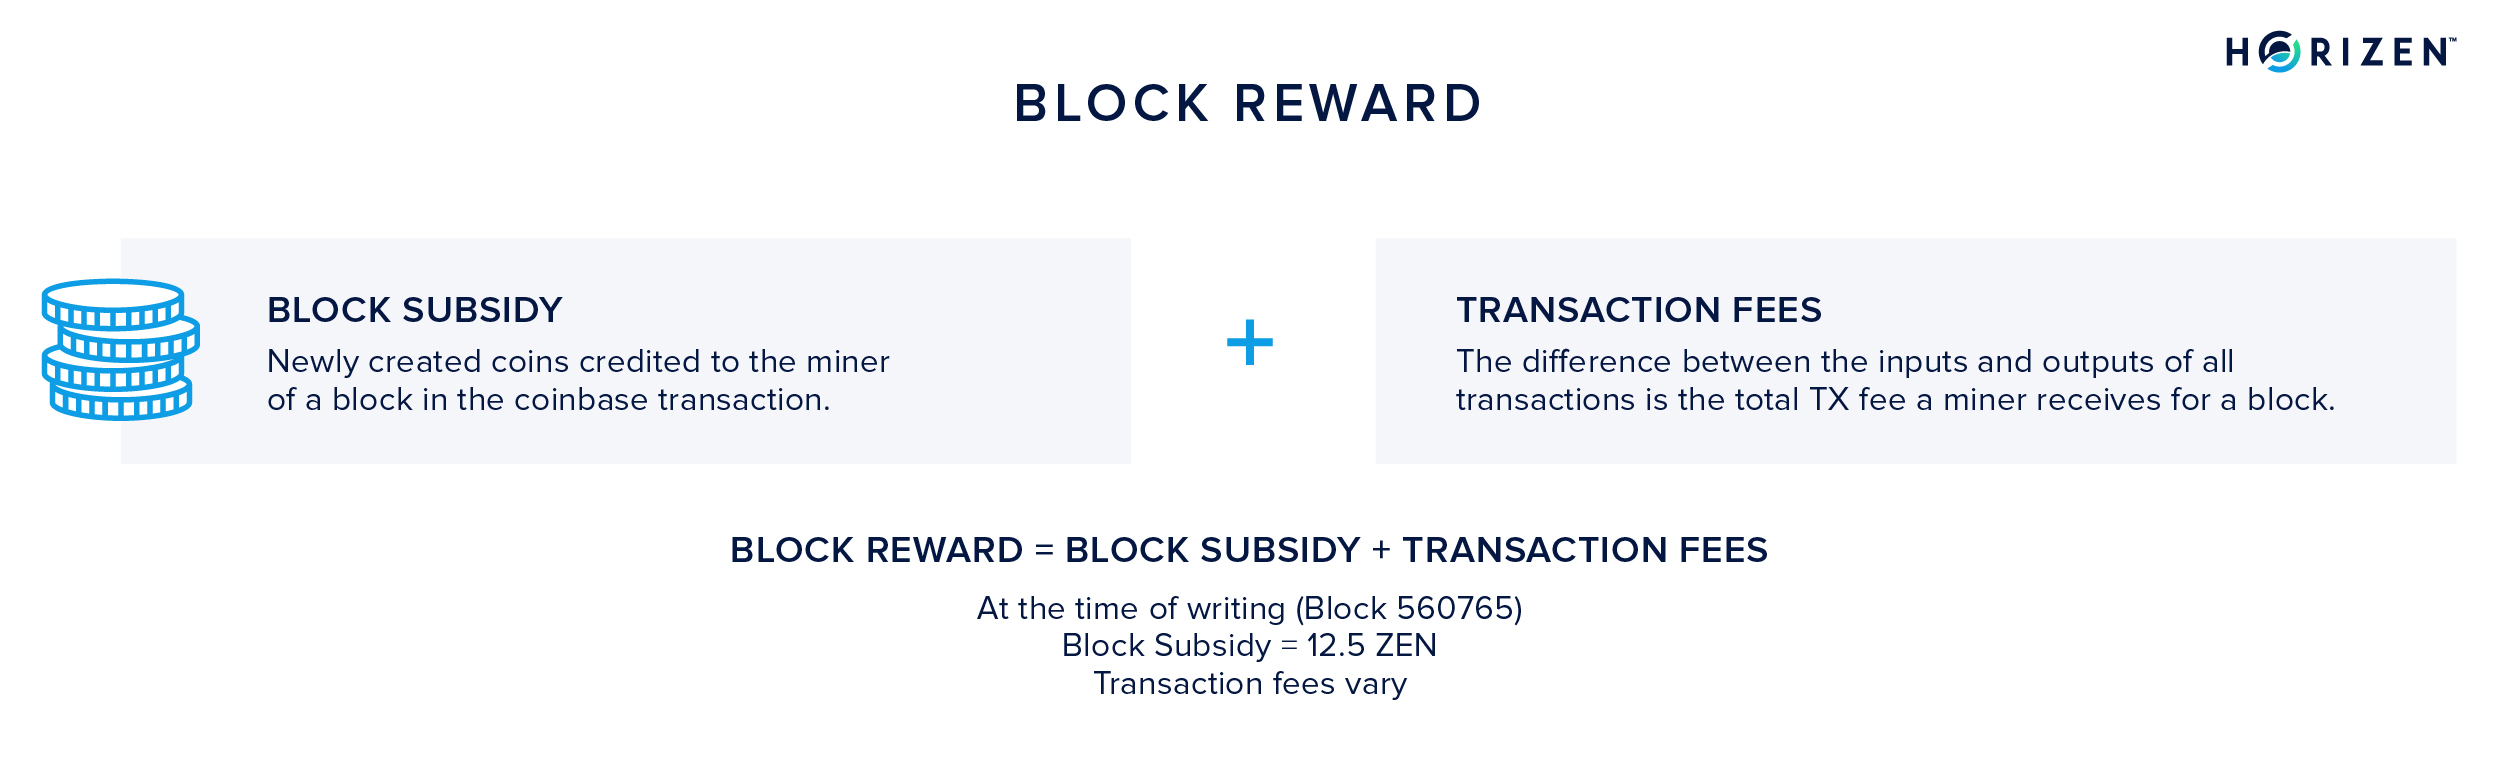 Block Reward: The sum of block subsidy and transaction fees